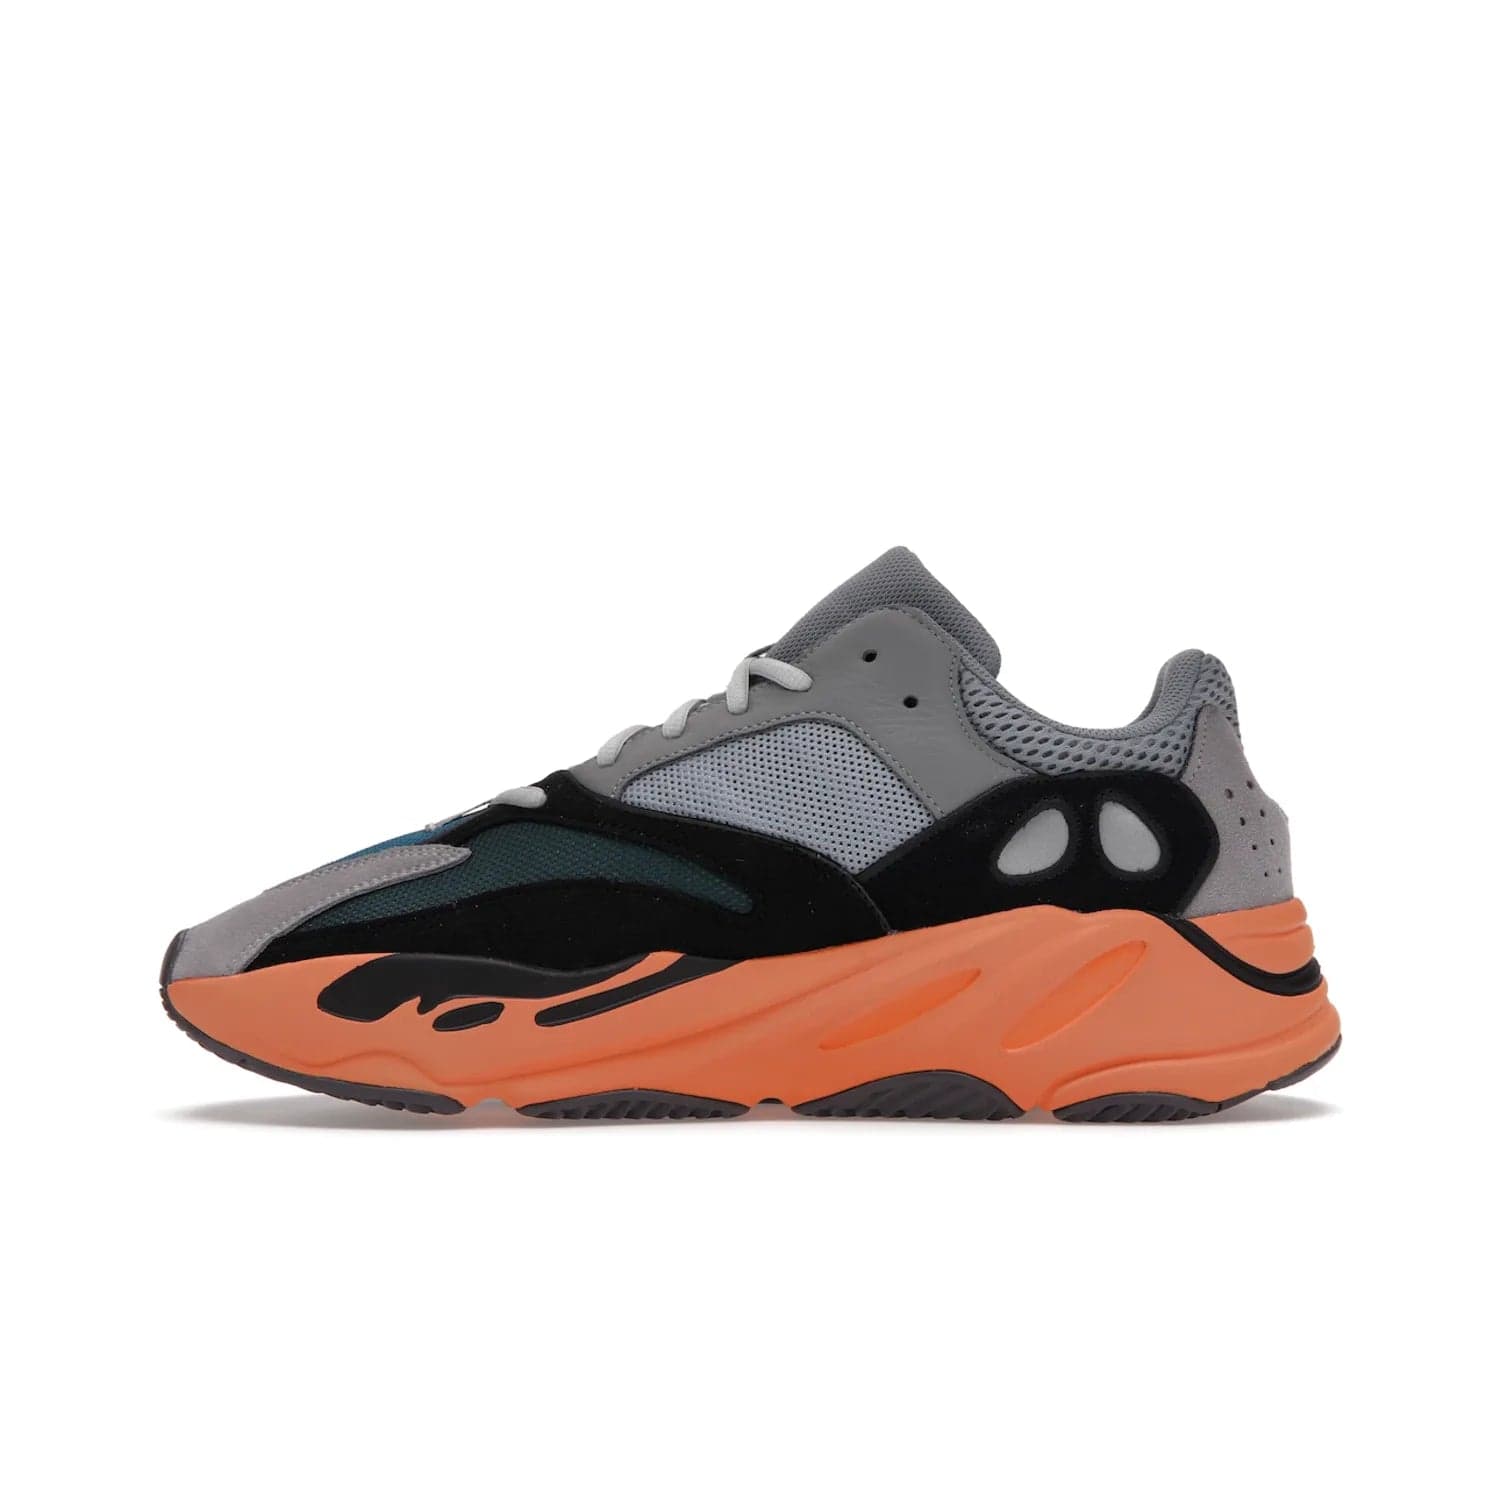 adidas Yeezy Boost 700 Wash Orange - Image 19 - Only at www.BallersClubKickz.com - Introducing the adidas Yeezy Boost 700 Wash Orange. Unique grey leather, suede, mesh upper and teal panels with a chunky Wash Orange Boost midsole. Release October 2021, make a statement today!